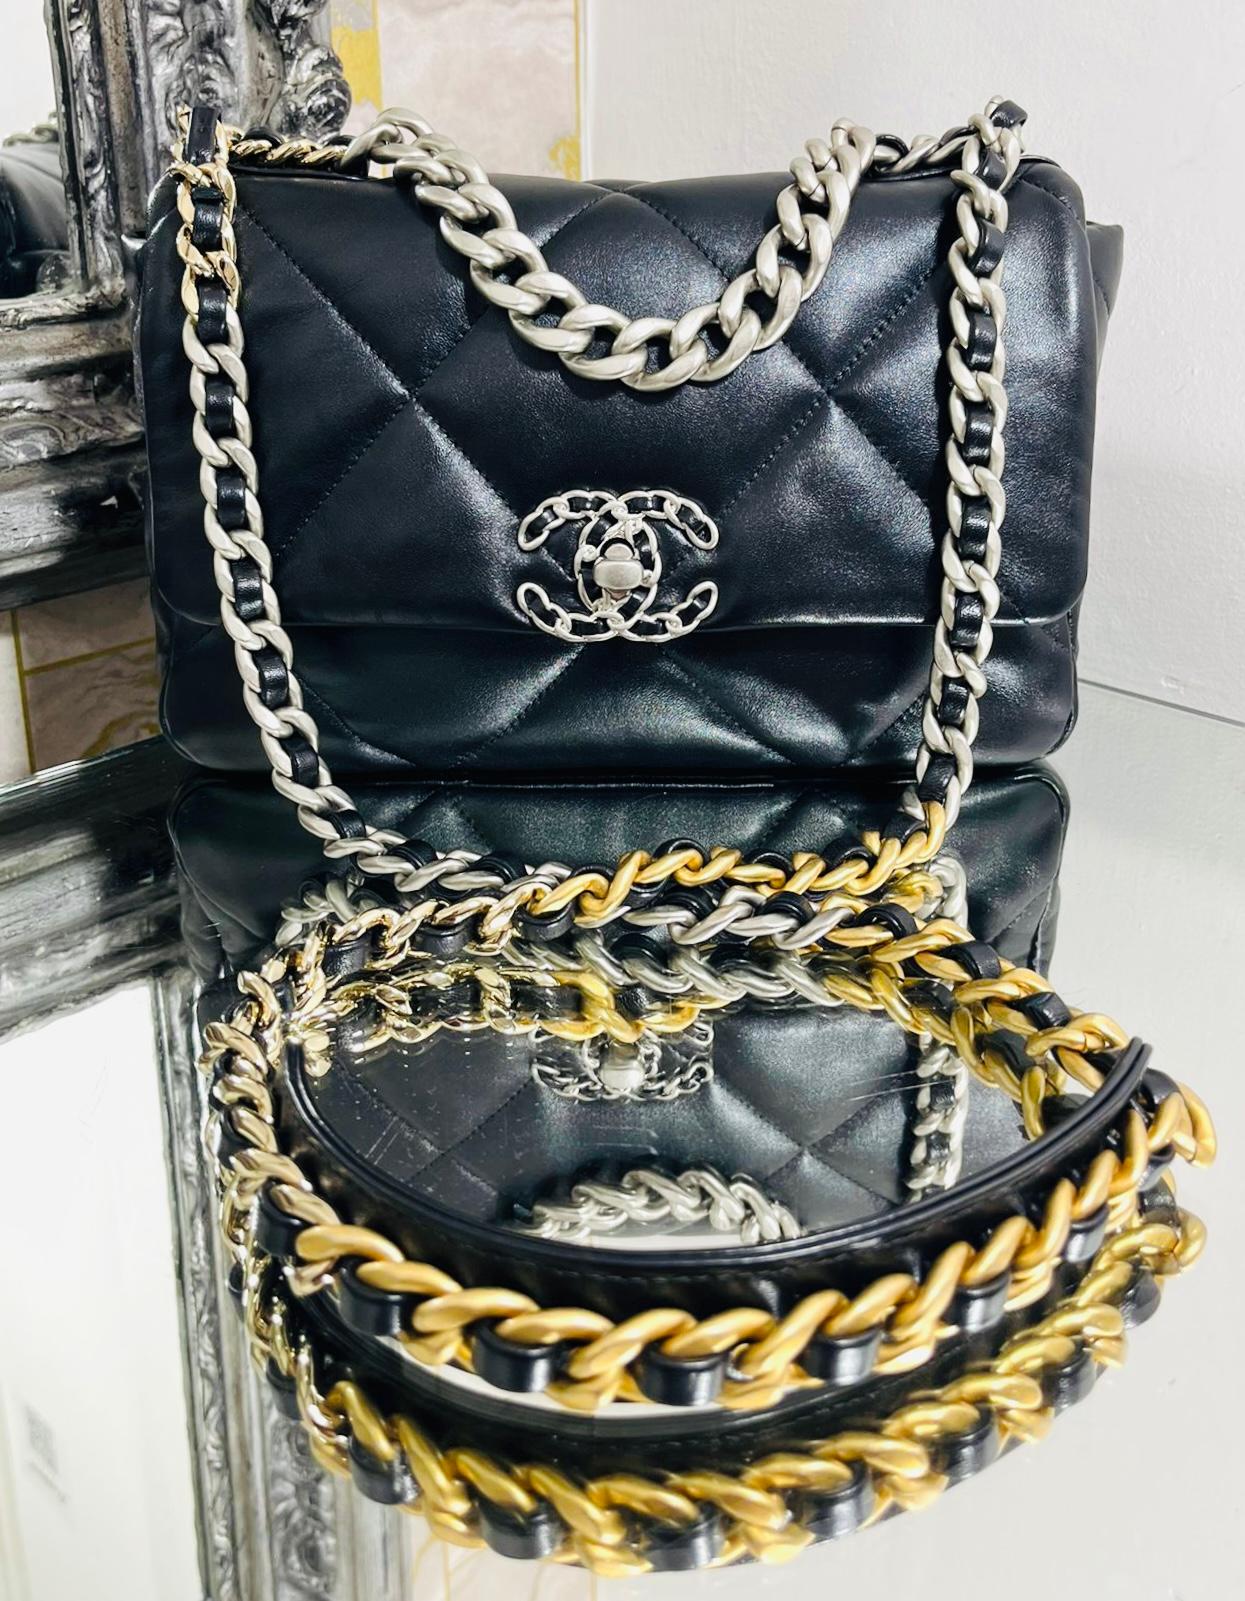 Chanel 19 Leather Flap Bag

Soft body, black bag designed with iconic diamond quilting.

Detailed with Chanel’s signature interlocking ‘CC’ turn-lock fastening with leather and chain link shoulder strap,

Featuring triple colour/ombre hardware, slip